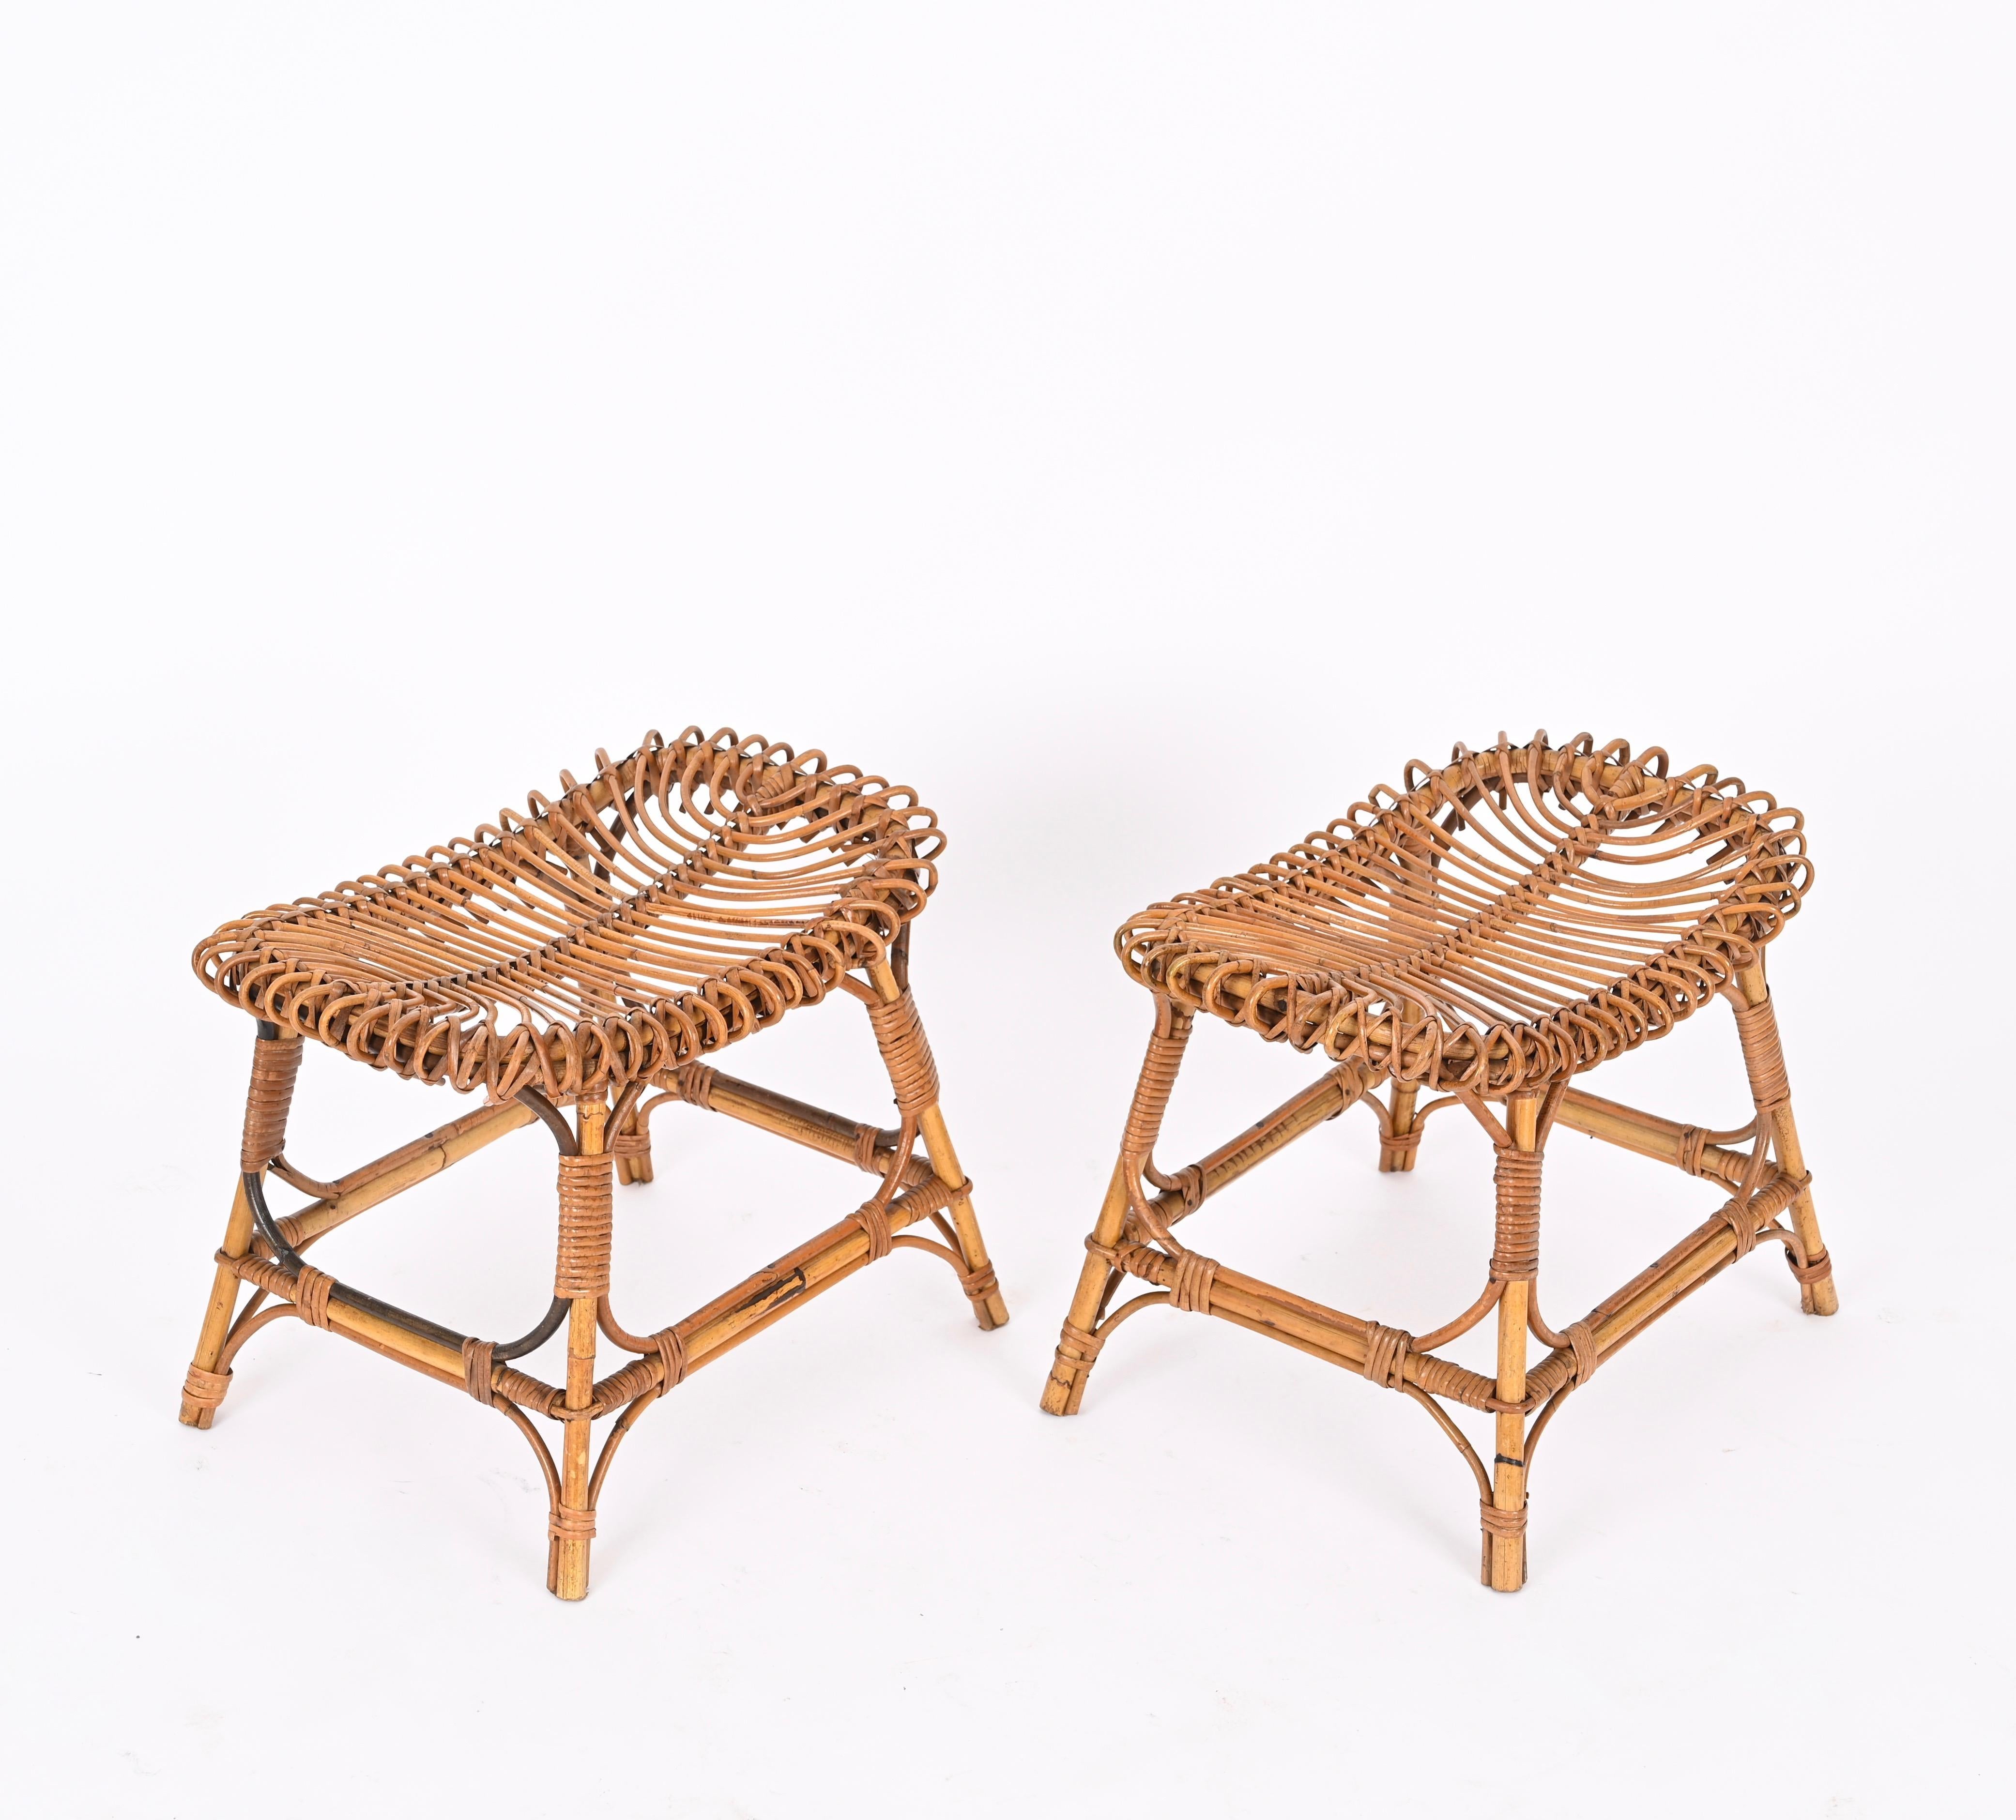 Franco Albini Mid-Century Rattan, Bamboo and Wicker, Pouf, Ottoman, Italy 1960s For Sale 2